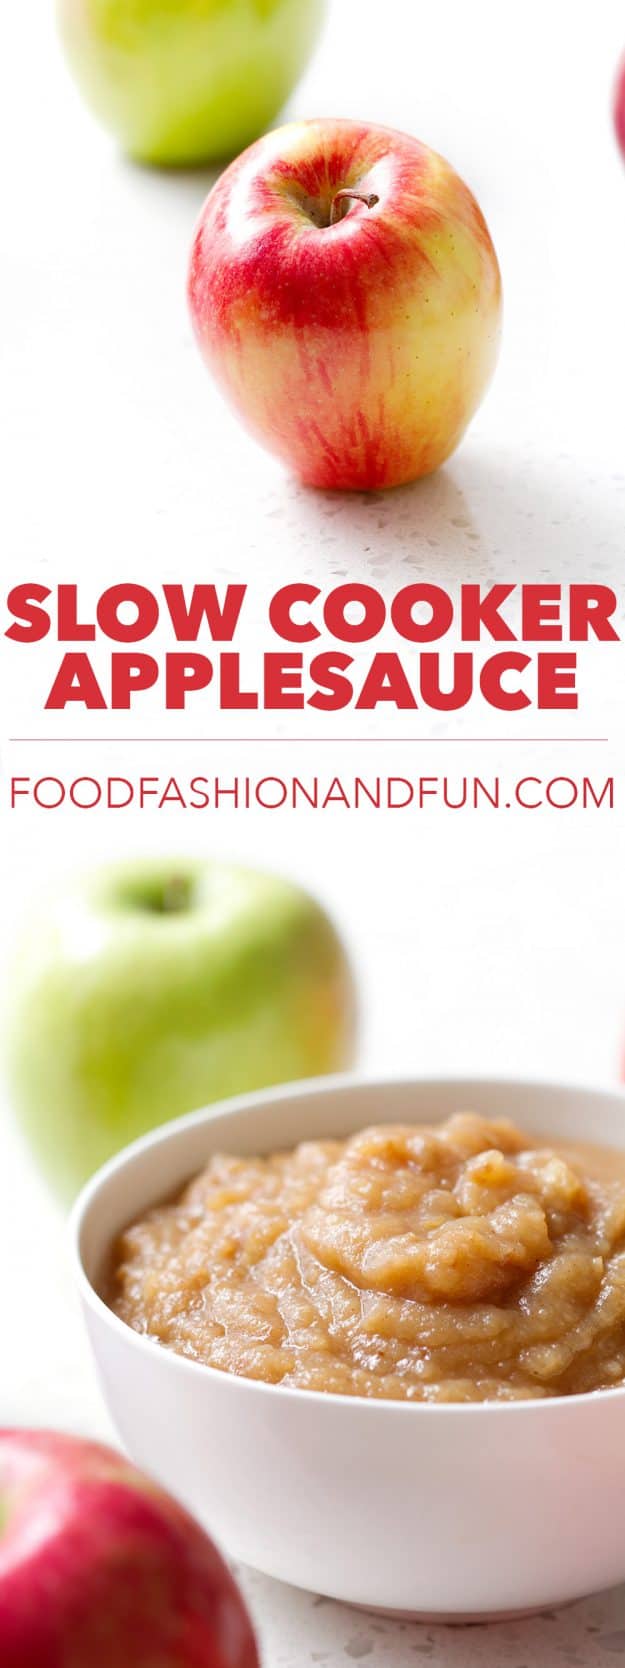 Slow Cooker Applesauce recipe that is so easy you don't even need to peel it. All you need is a slow cooker!